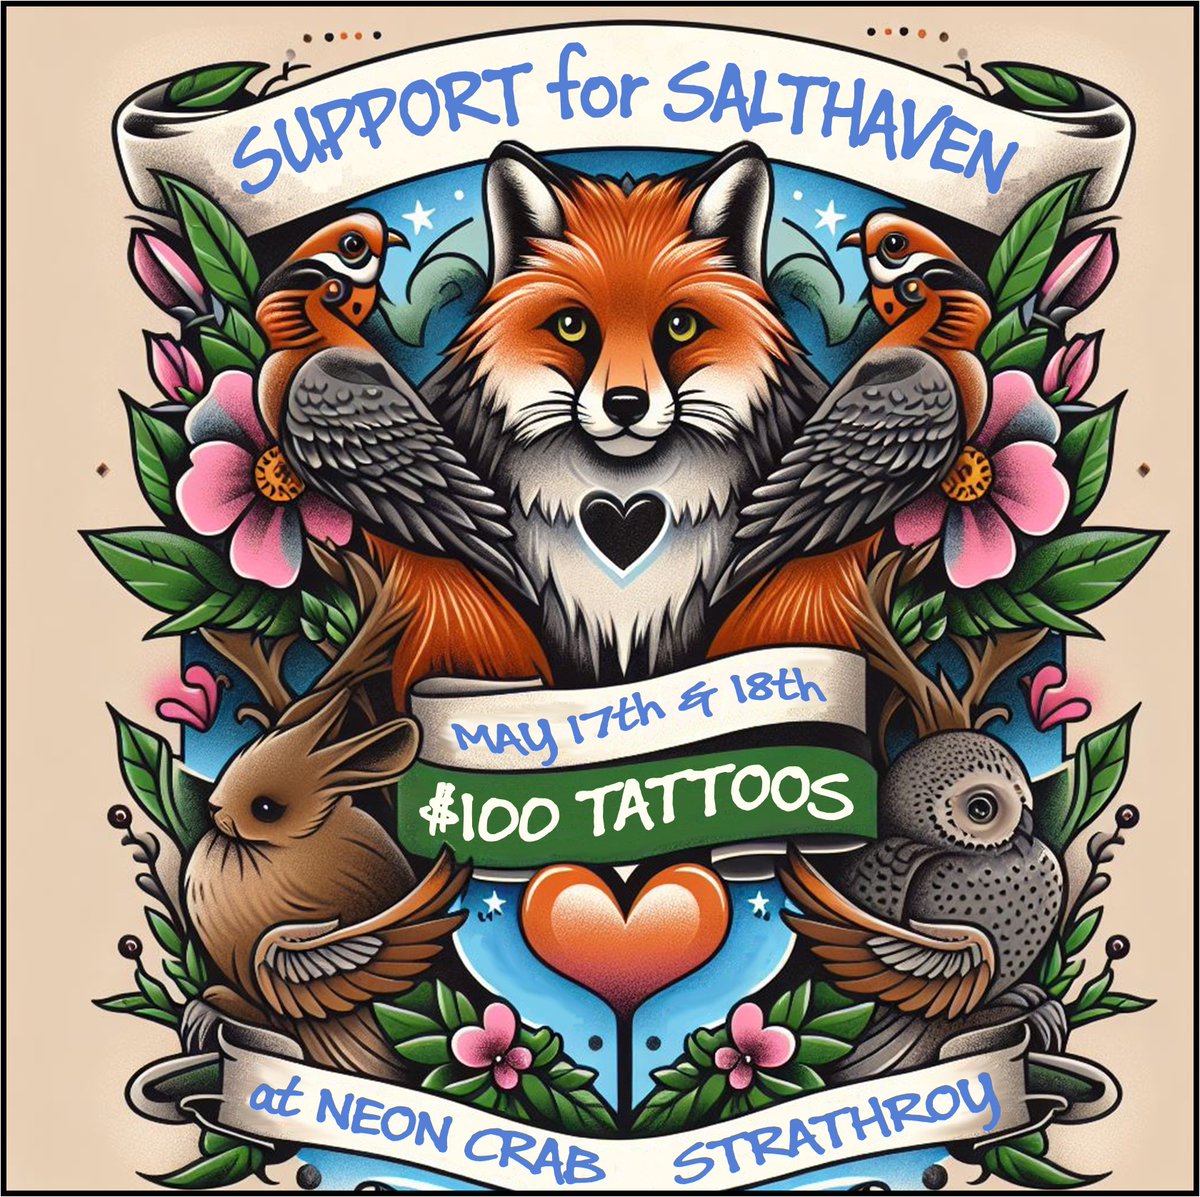 On May 17th + 18th #NeonCrabTattoo in #Strathroy is hosting a tattoo fundraiser for #Salthaven! Get a custom wildlife inspired #tattoo for $100 with the proceeds going towards much needed supplies for Salthaven! Staff + wildlife ambassadors will be on-site Saturday 1-3pm!🦊